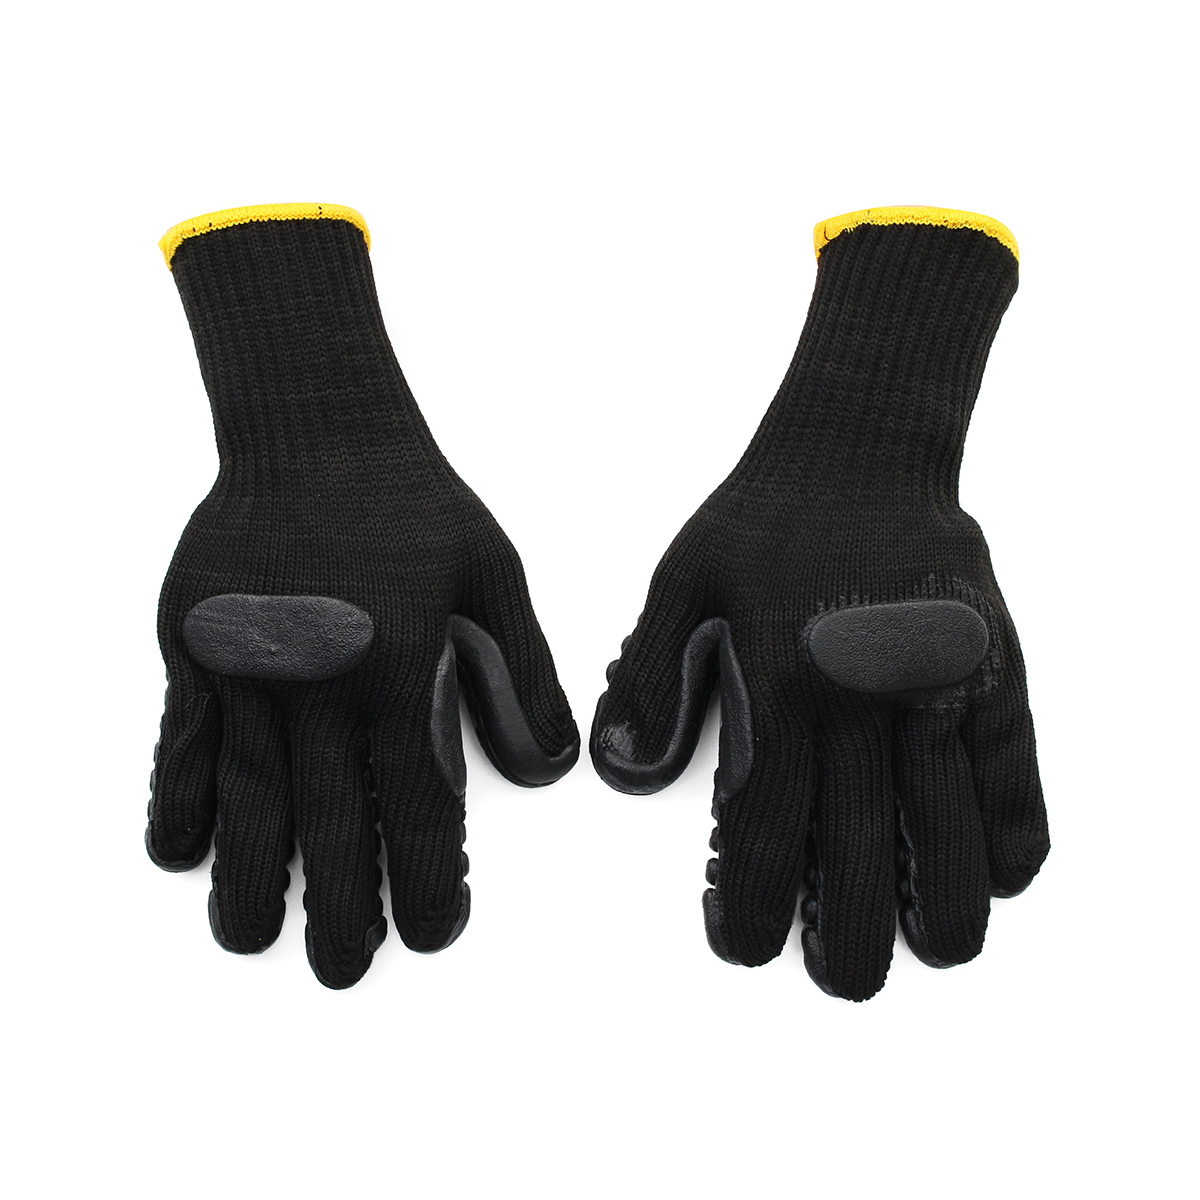 Rubber-Touch-Screen-Gloves-Anti-slip-Shockproof-Worker-Safe-Gloves-Thickened-Mining-Drill-Work-Tacti-1231695-7